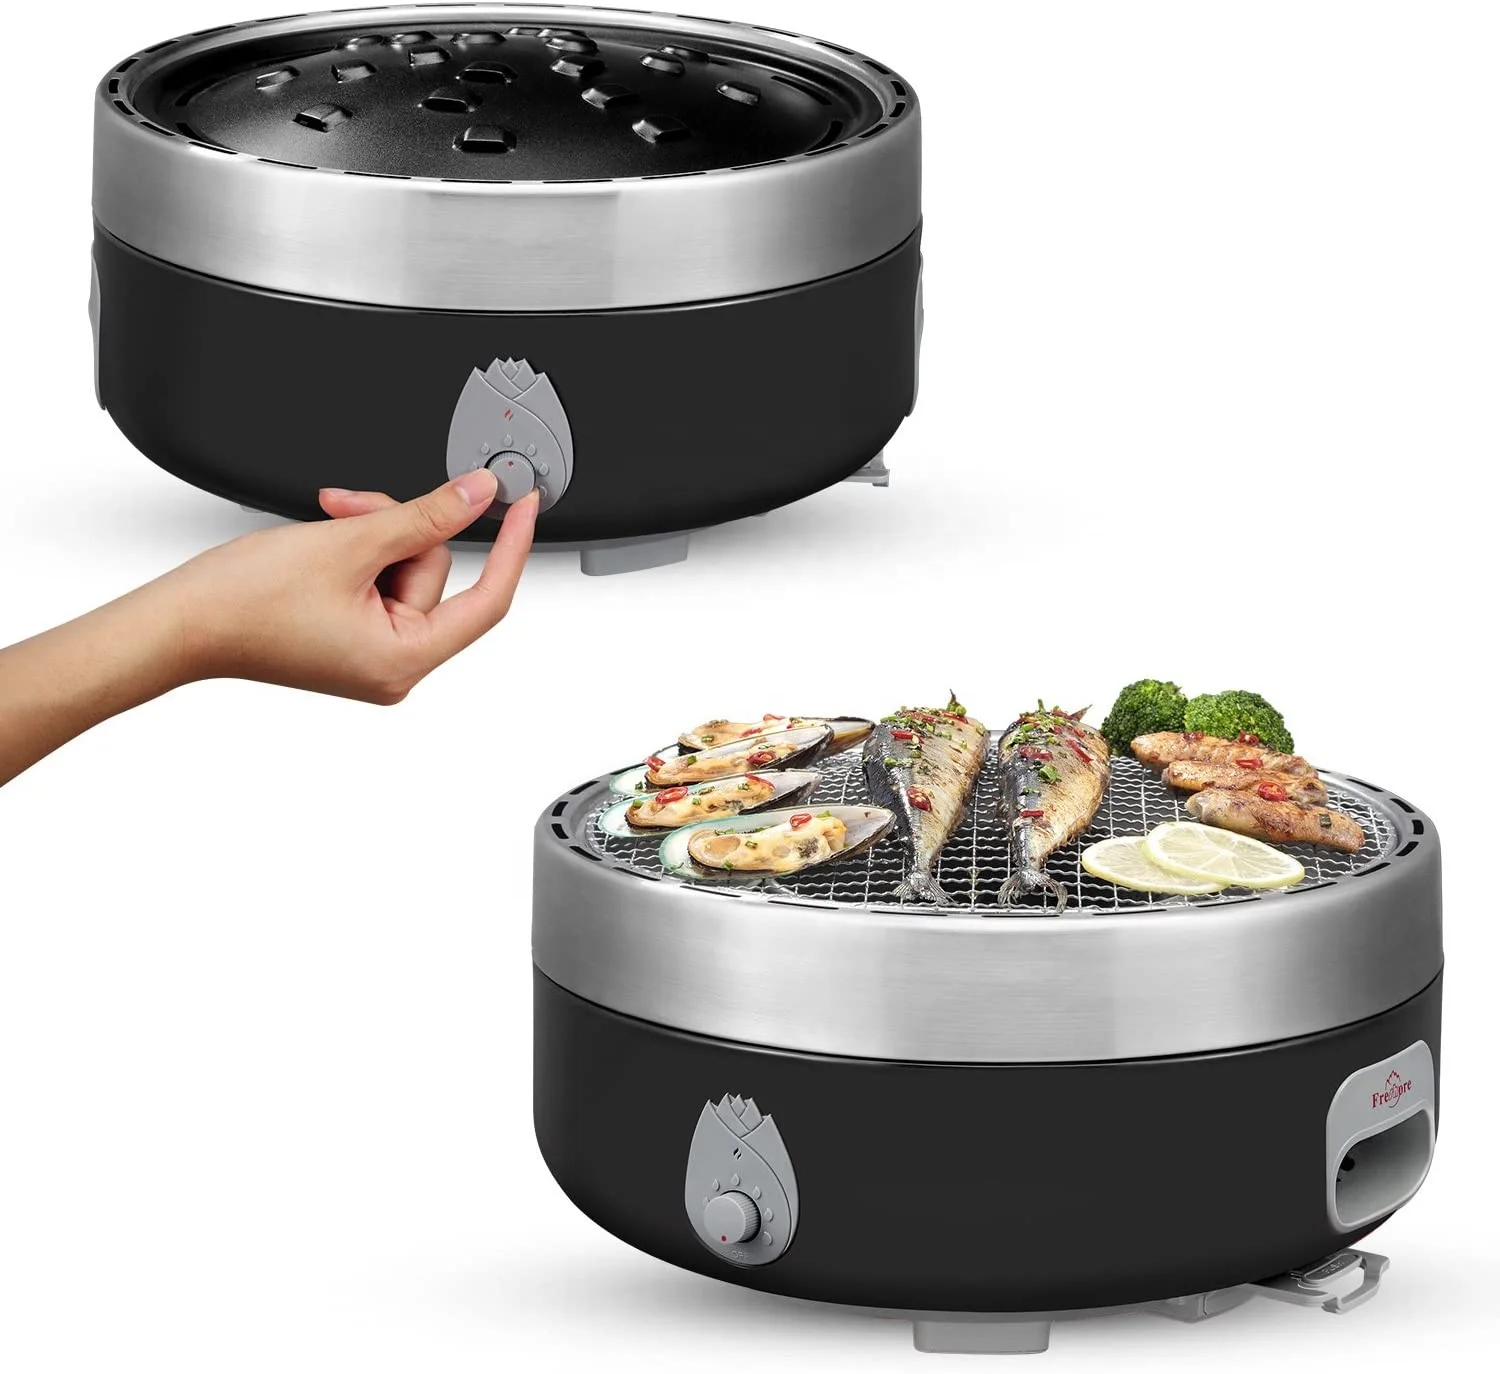 

Portable Smokeless Charcoal Grill Outdoor Camping BBQ Grill Making the BBQ Food Favor Ideal For Around 4-8 People